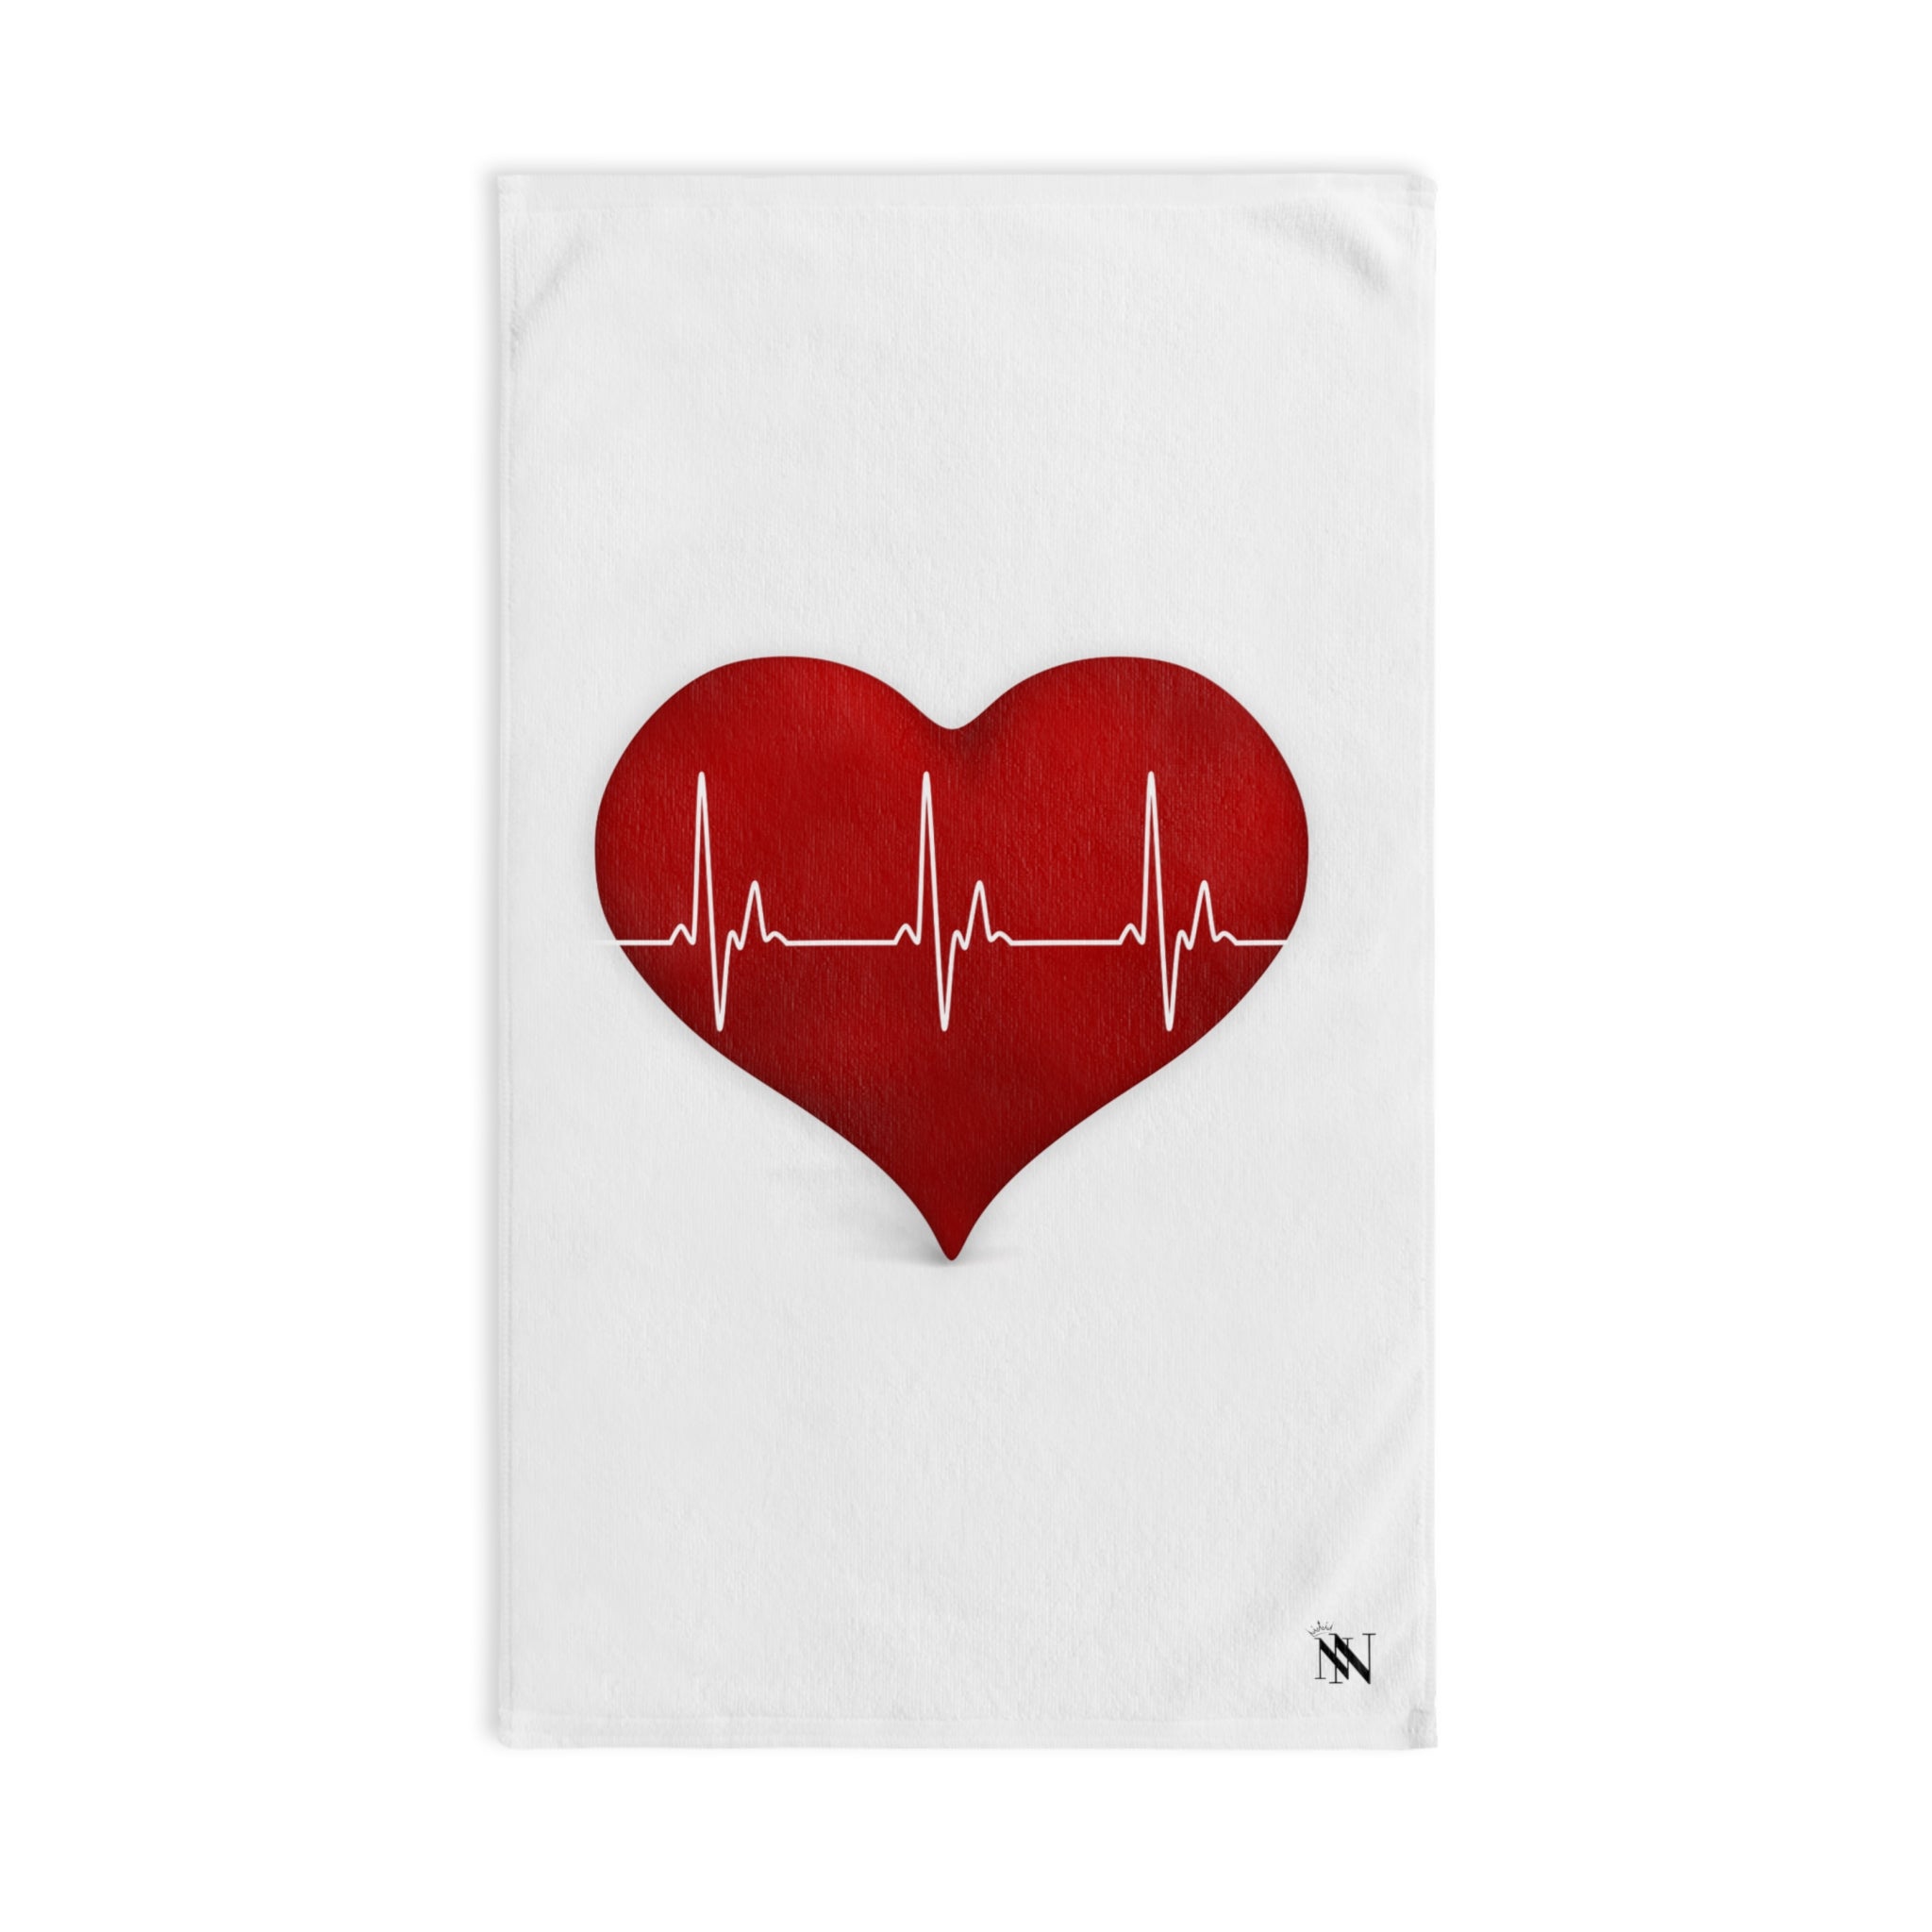 Heartbeat Lavendar | Funny Gifts for Men - Gifts for Him - Birthday Gifts for Men, Him, Husband, Boyfriend, New Couple Gifts, Fathers & Valentines Day Gifts, Hand Towels NECTAR NAPKINS